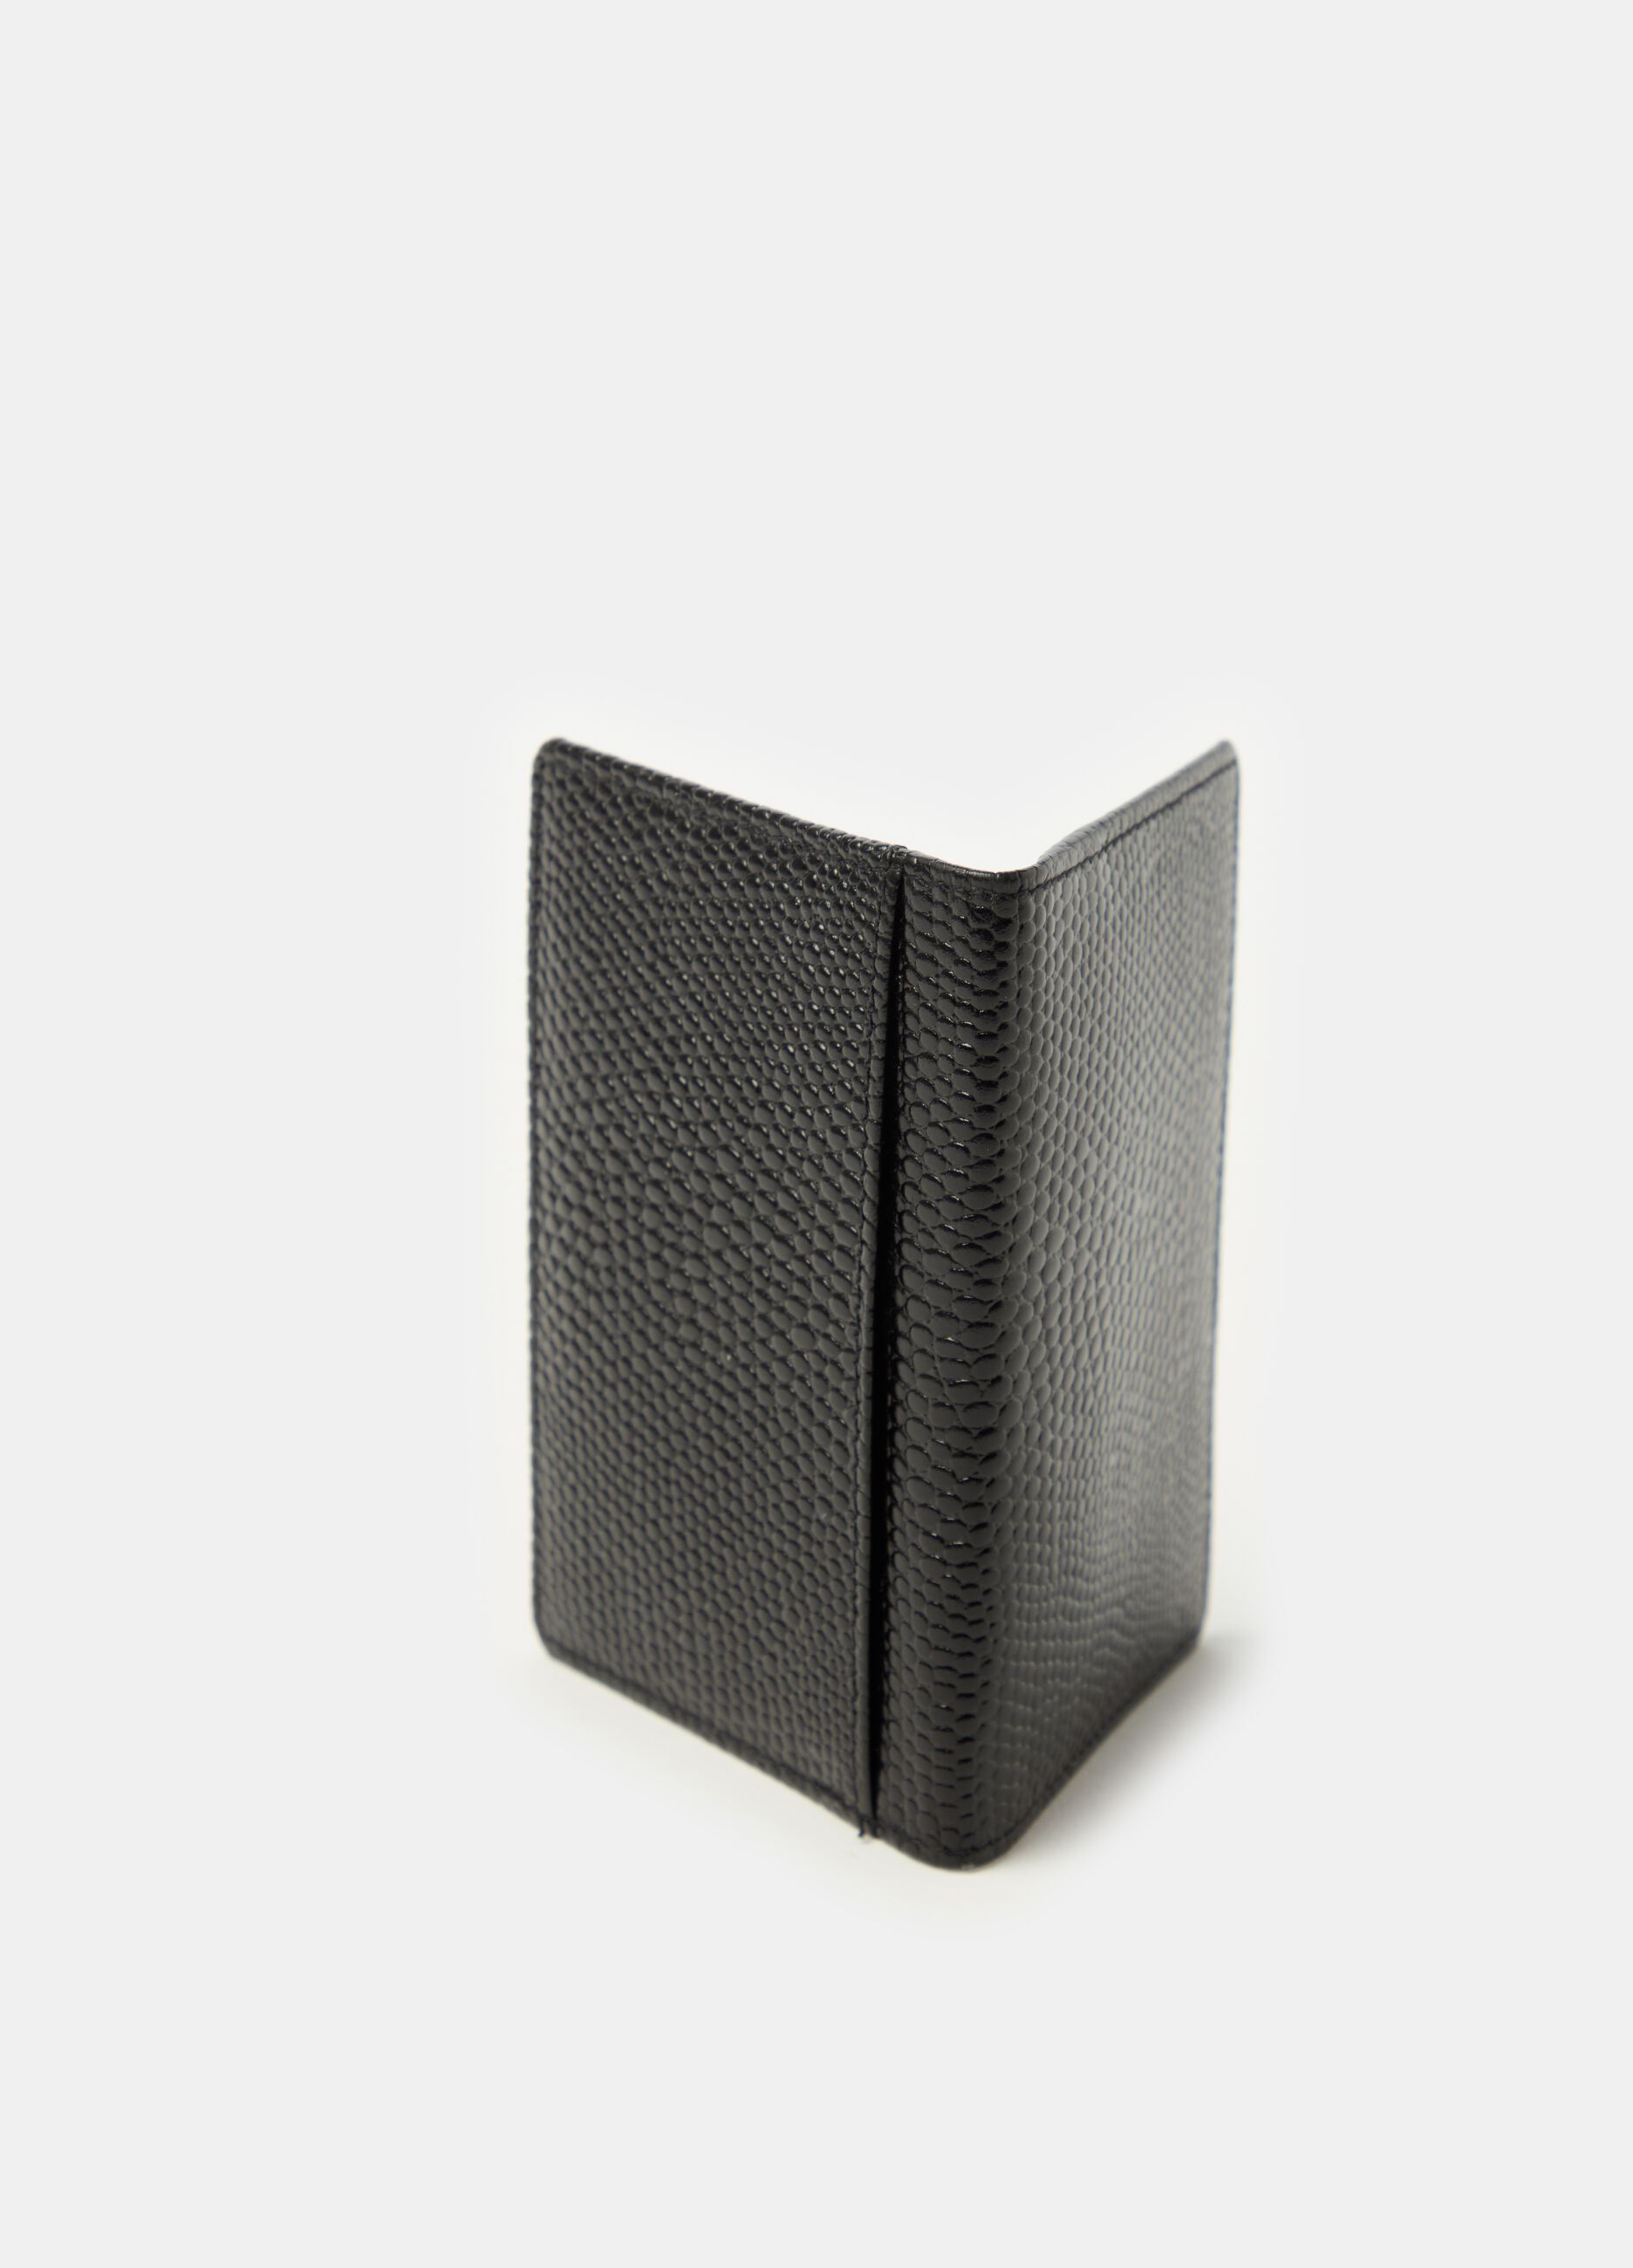 Contemporary leather card holder